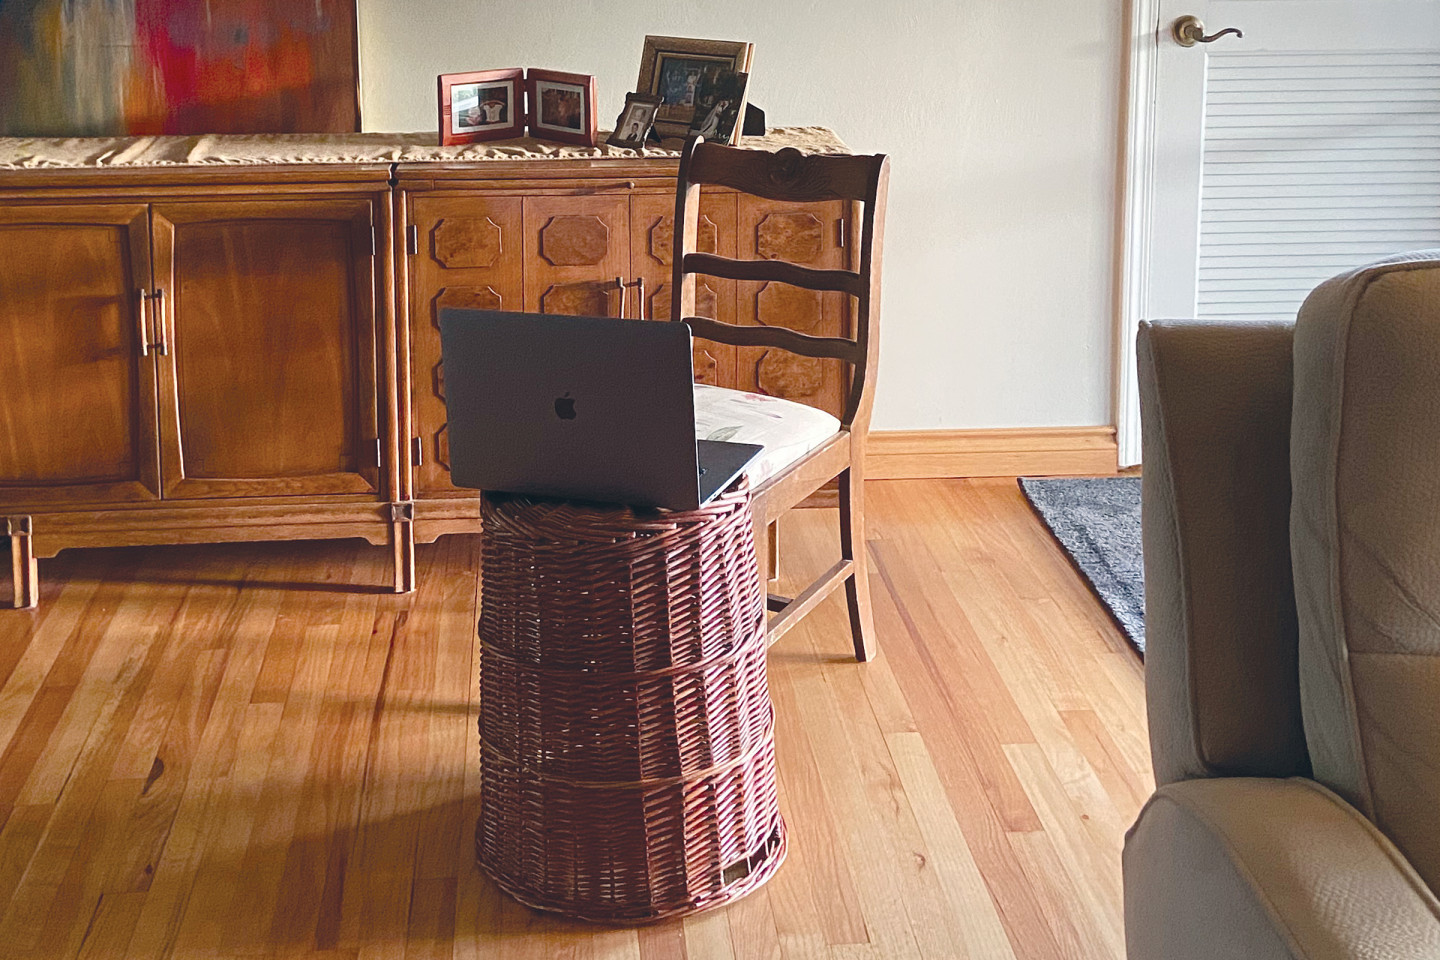 A laptop computer sits on an overturned laundry basket in a living room.